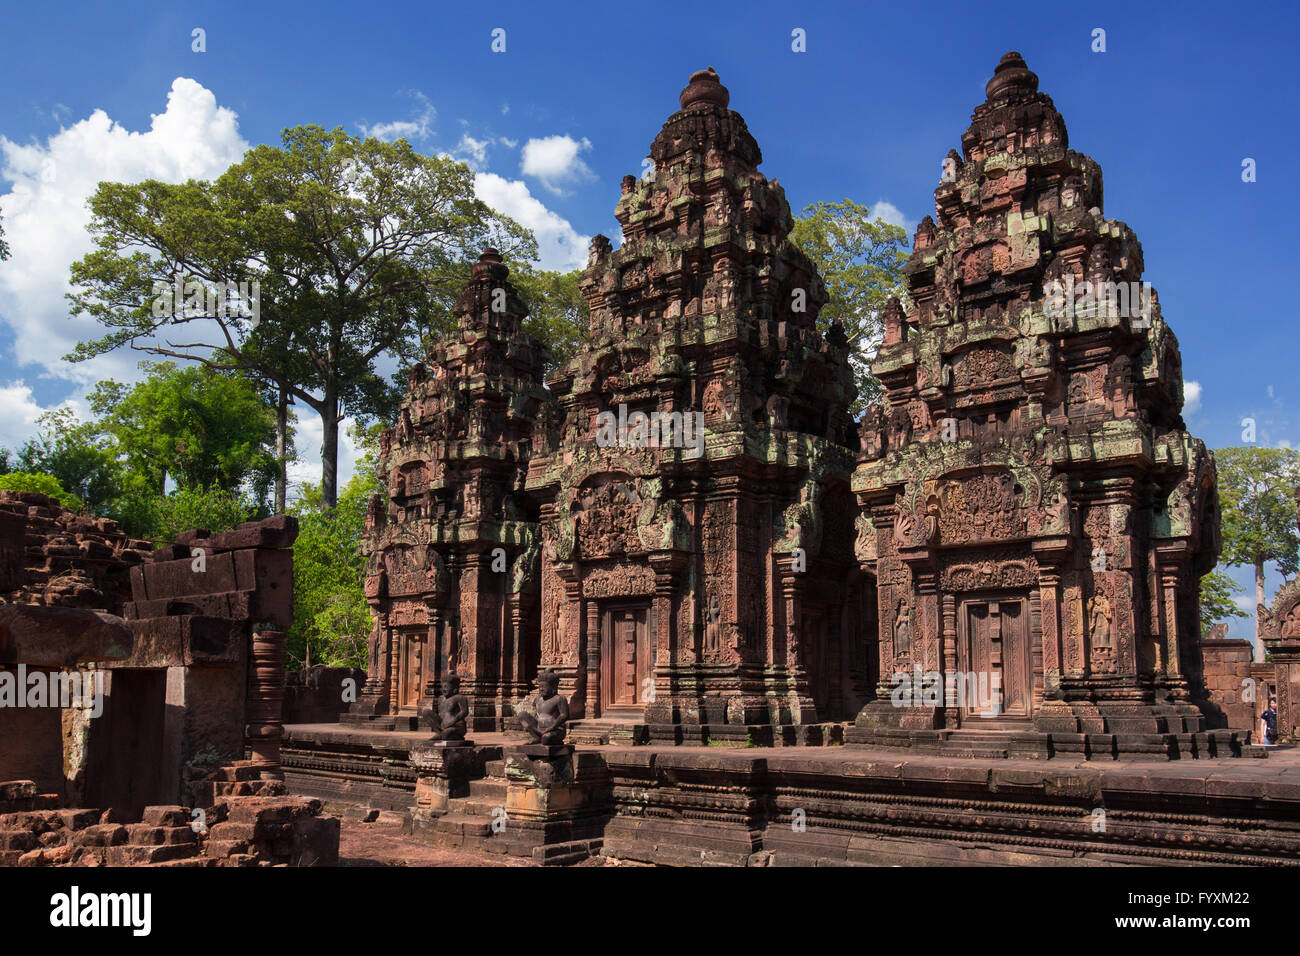 Banteay Srei or Lady Temple at Siem Reap Cambodia Stock Photo